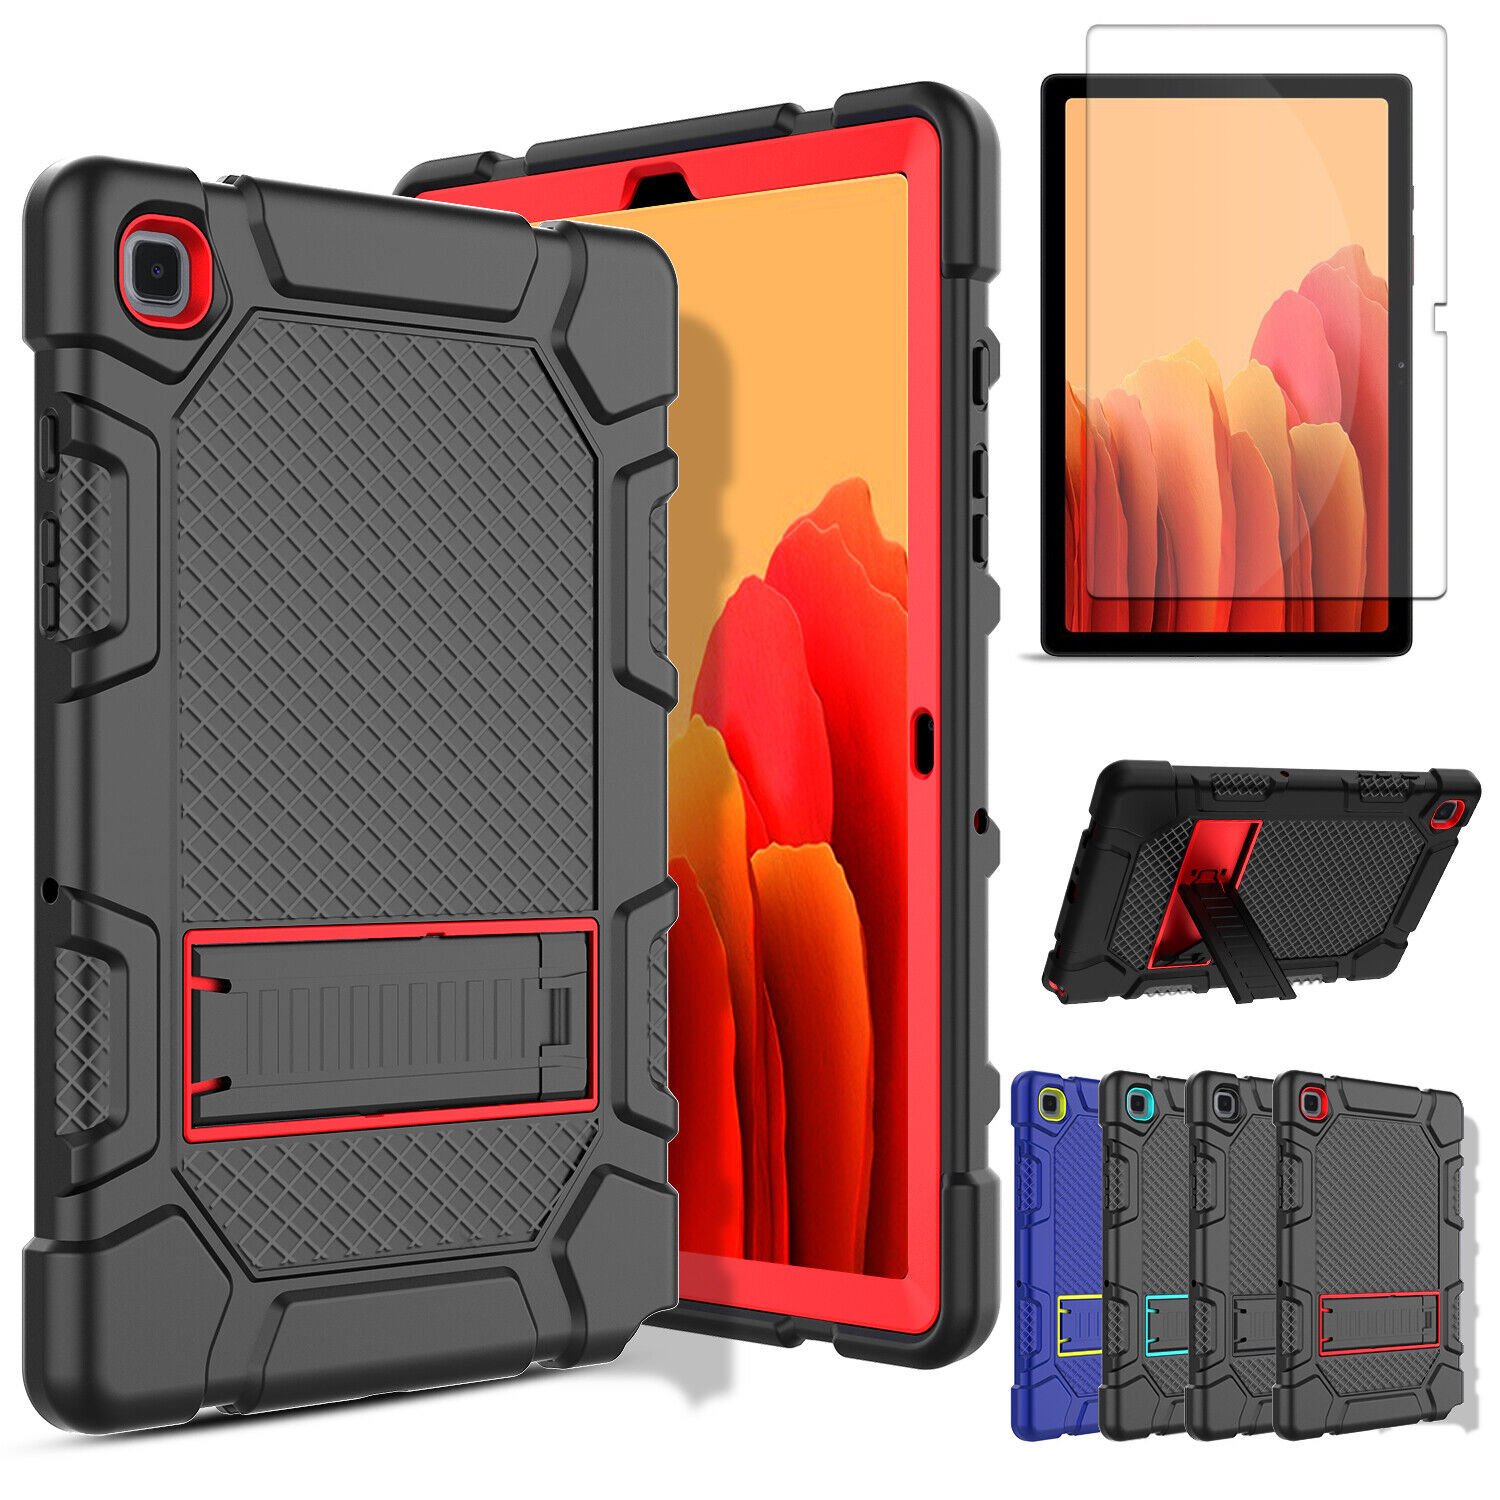 Periodiek Smelten Atlas For Samsung Galaxy Tab A7 10.4&#039;&#039; 2020 Tablet Case Rugged Cover,  Screen Protector | eBay